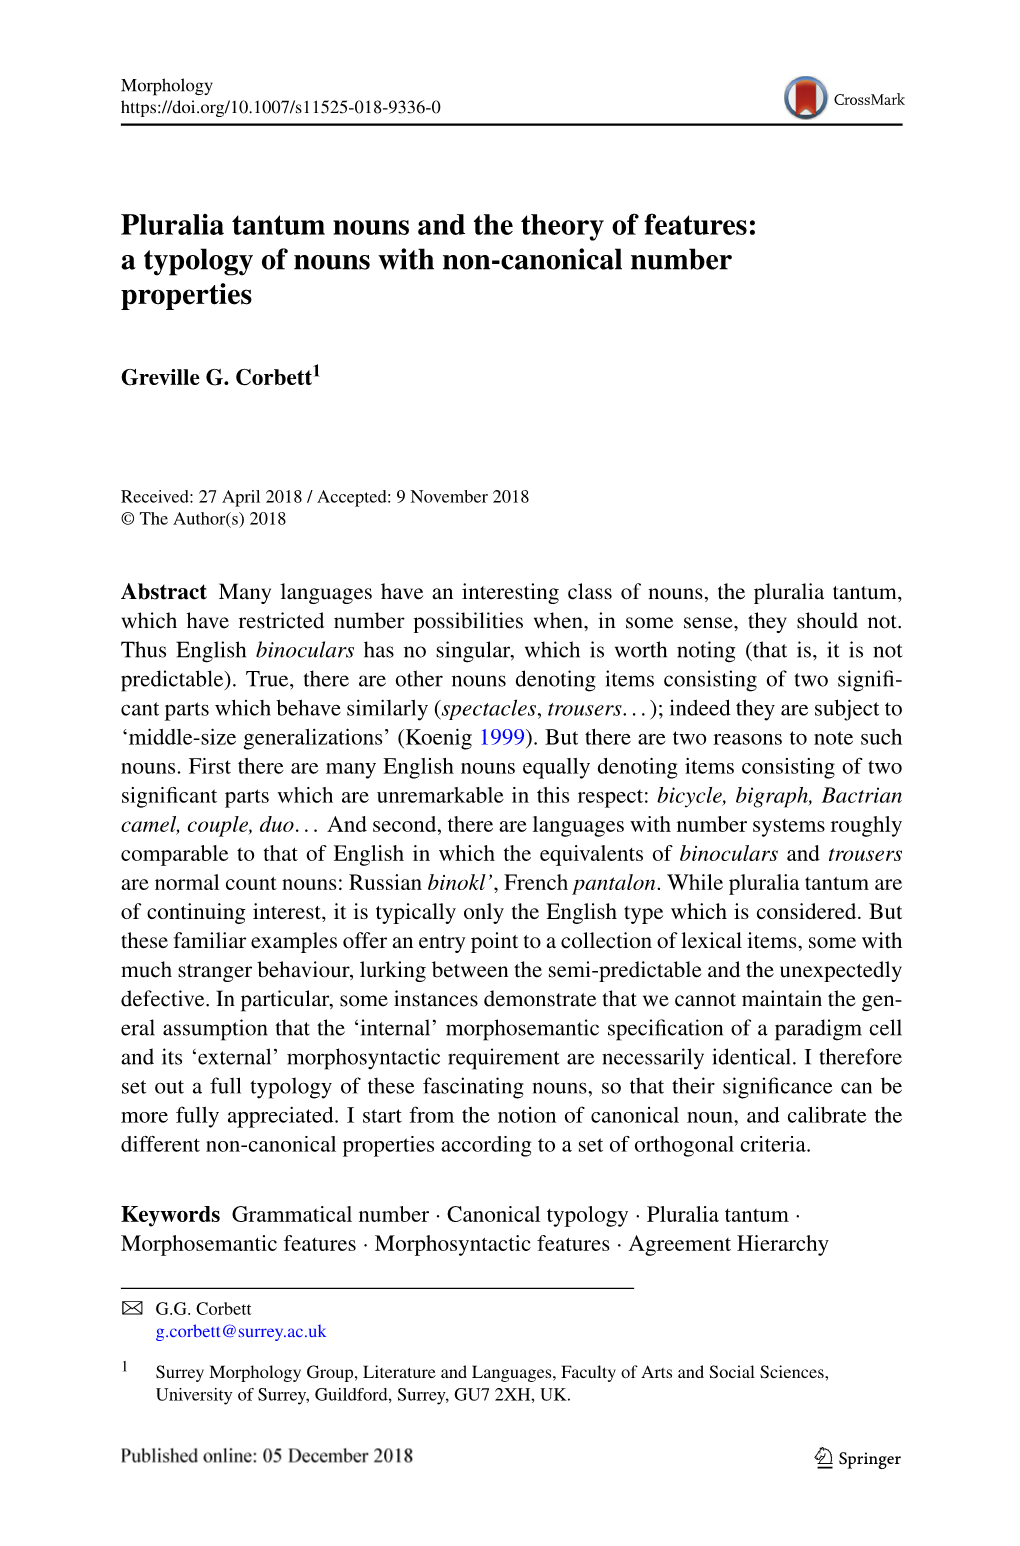 Pluralia Tantum Nouns and the Theory of Features: a Typology of Nouns with Non-Canonical Number Properties